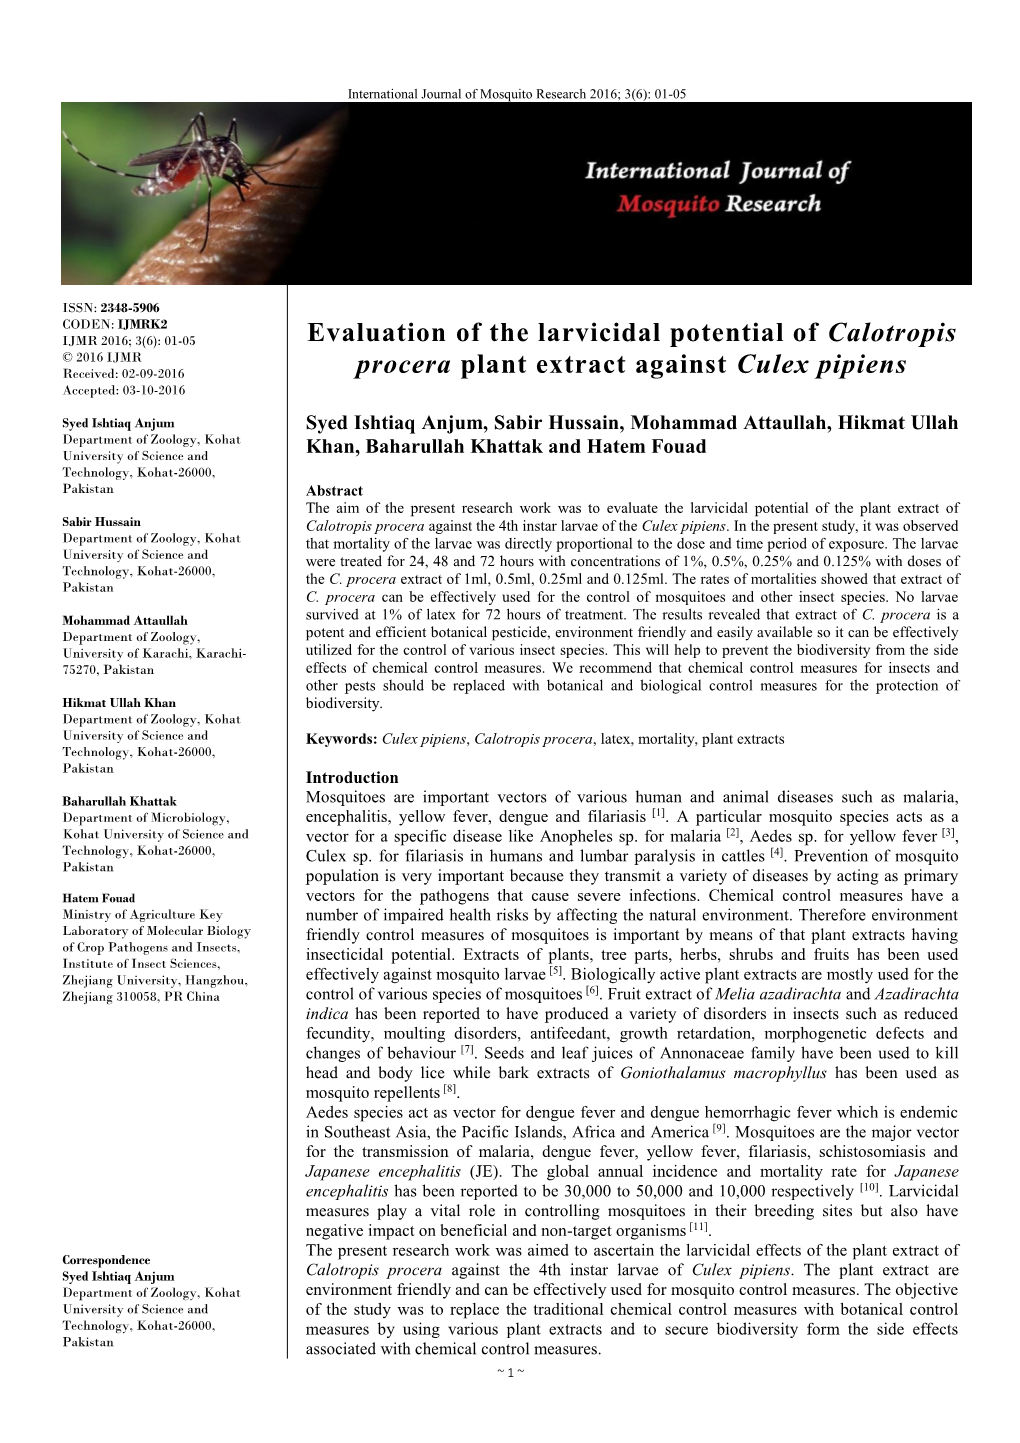 Evaluation of the Larvicidal Potential of Calotropis Procera Plant Extract